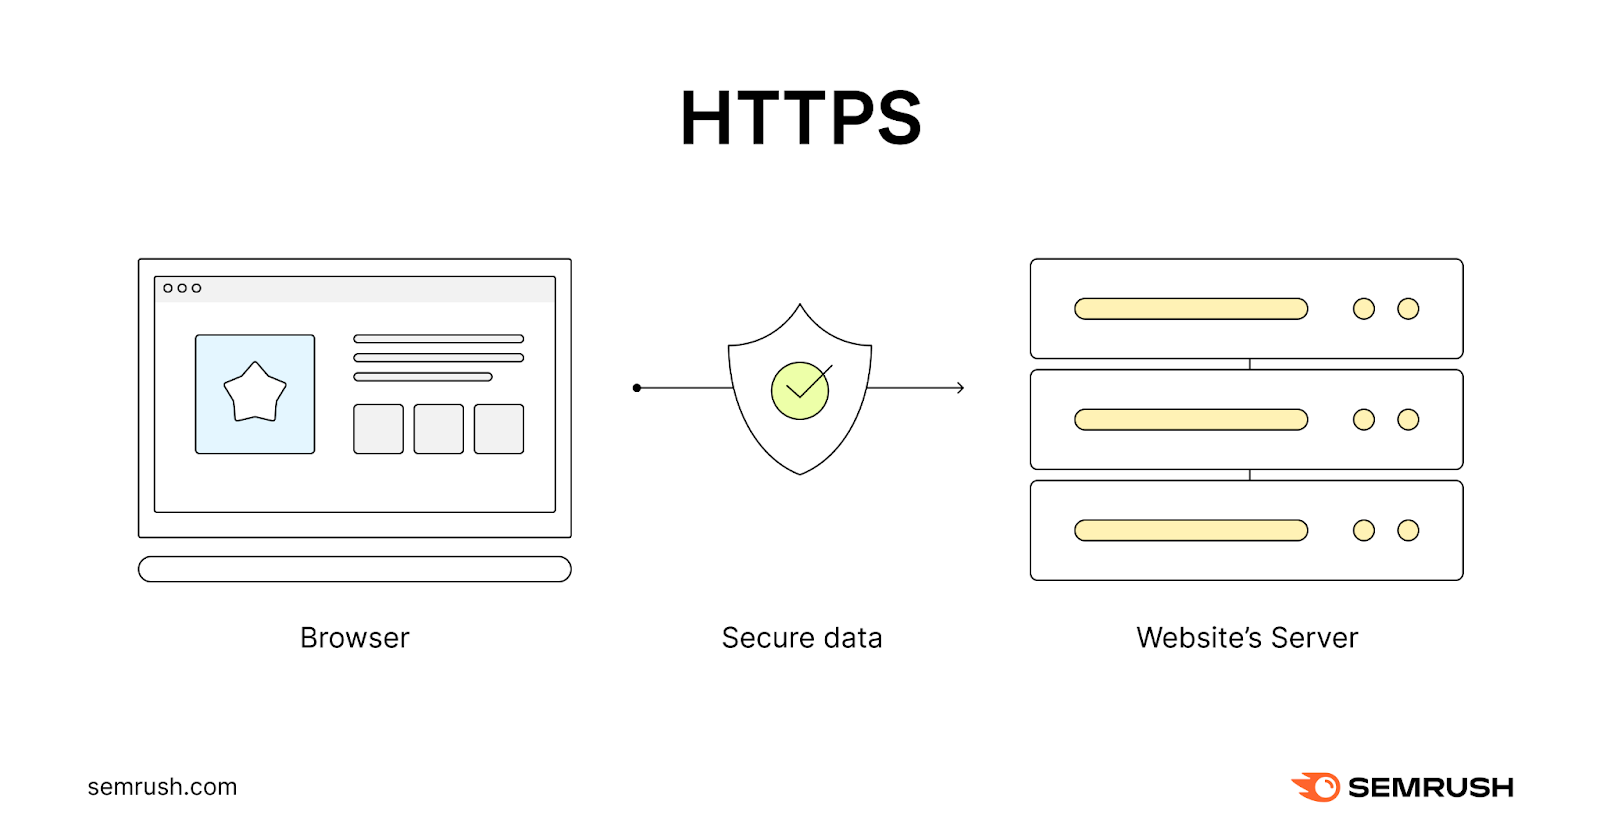 A visual of a browser and a website's server, with a secure data between them (HTTPS)